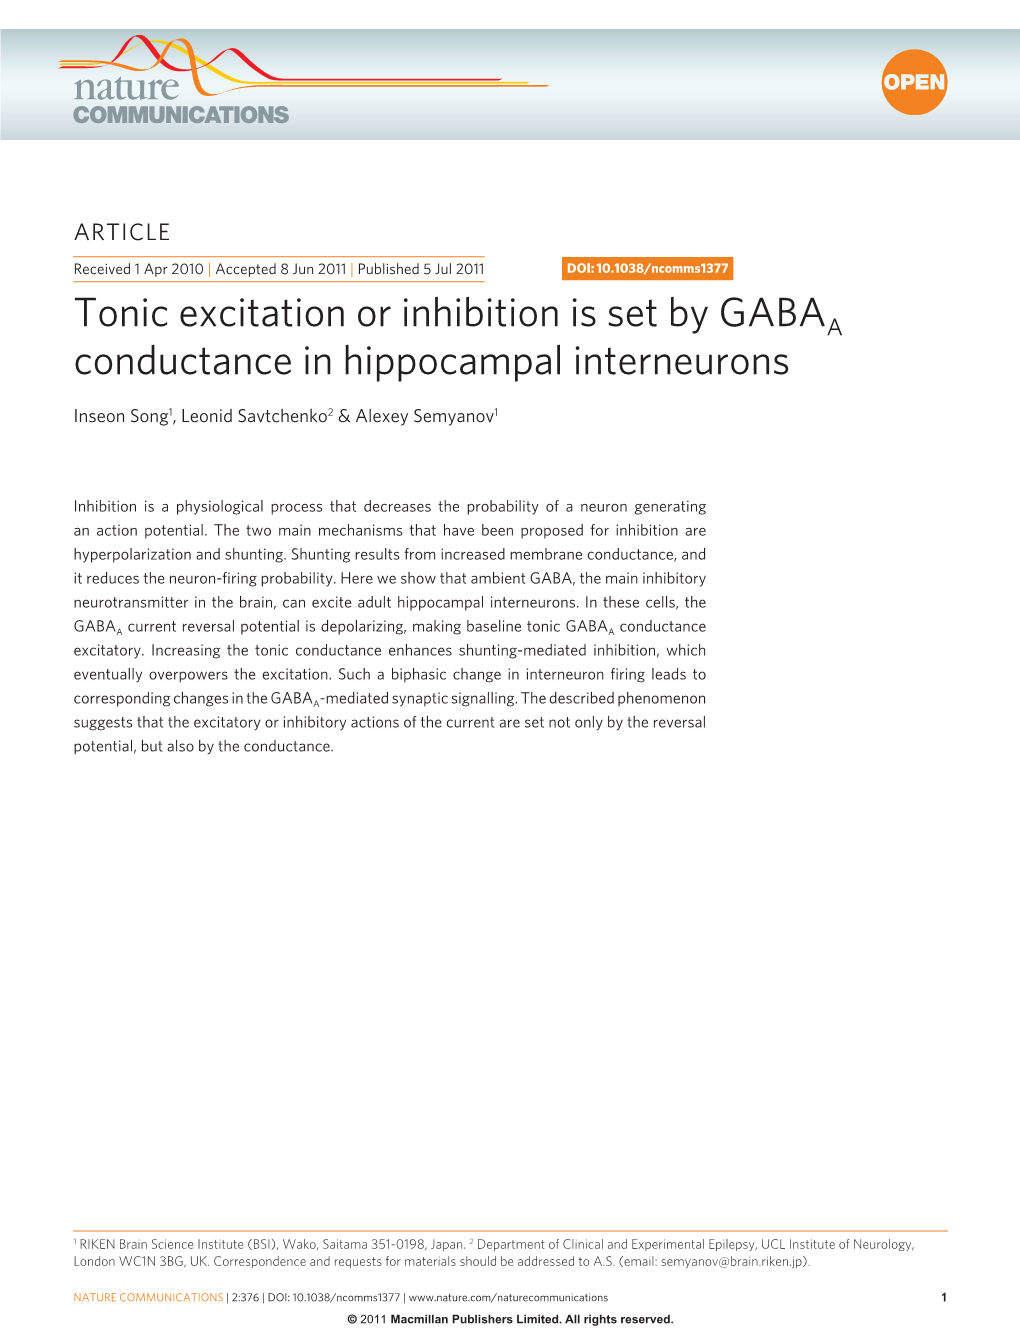 Tonic Excitation Or Inhibition Is Set by GABAA Conductance in Hippocampal Interneurons